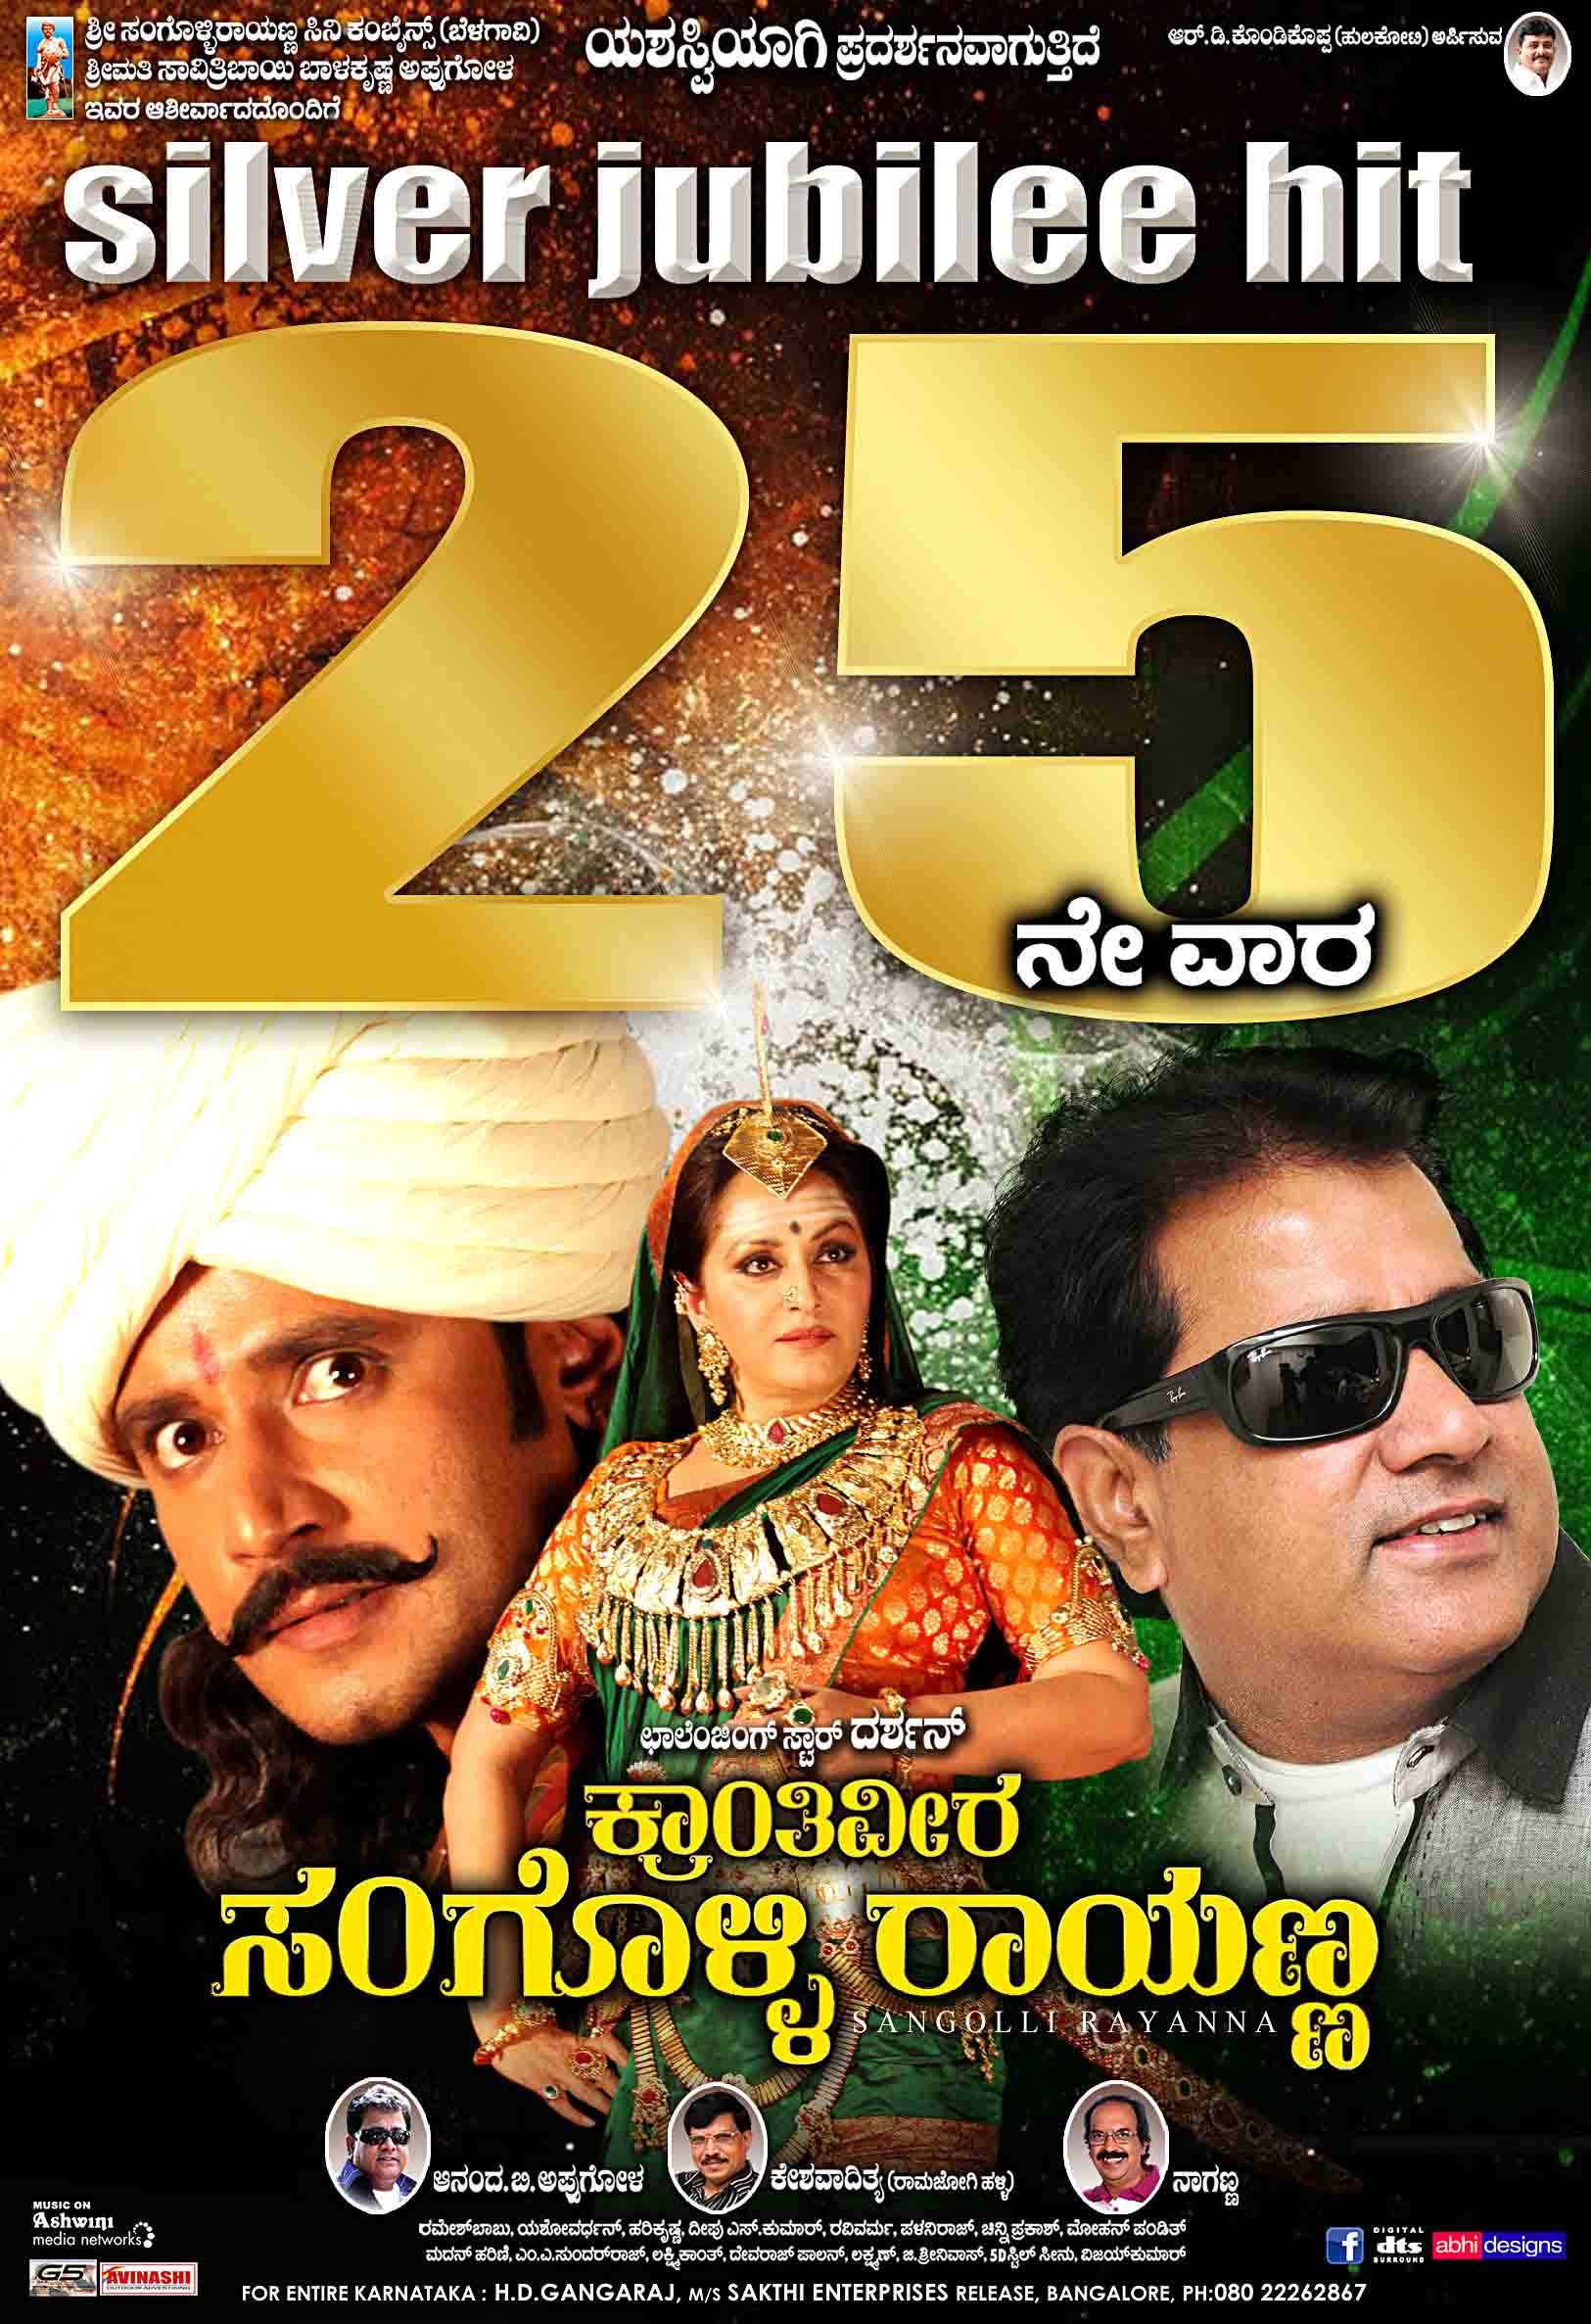 Mega Sized Movie Poster Image for Sangolli Rayanna (#73 of 79)